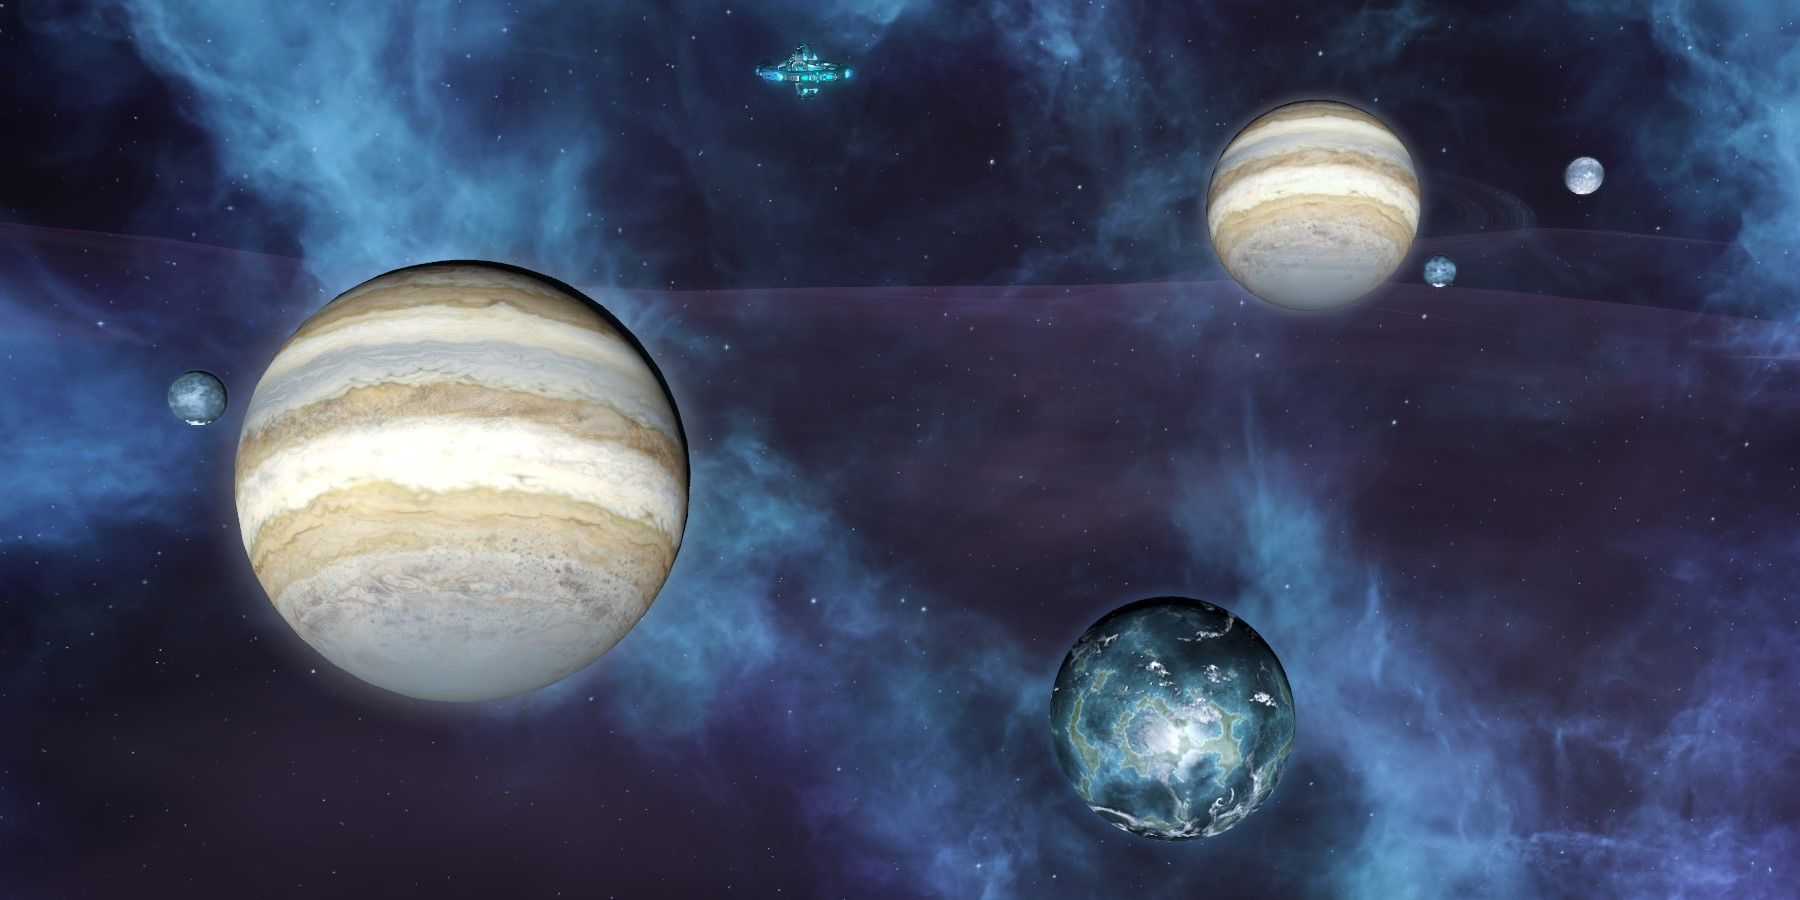 Stellaris Ocean World and Gas Giant planets